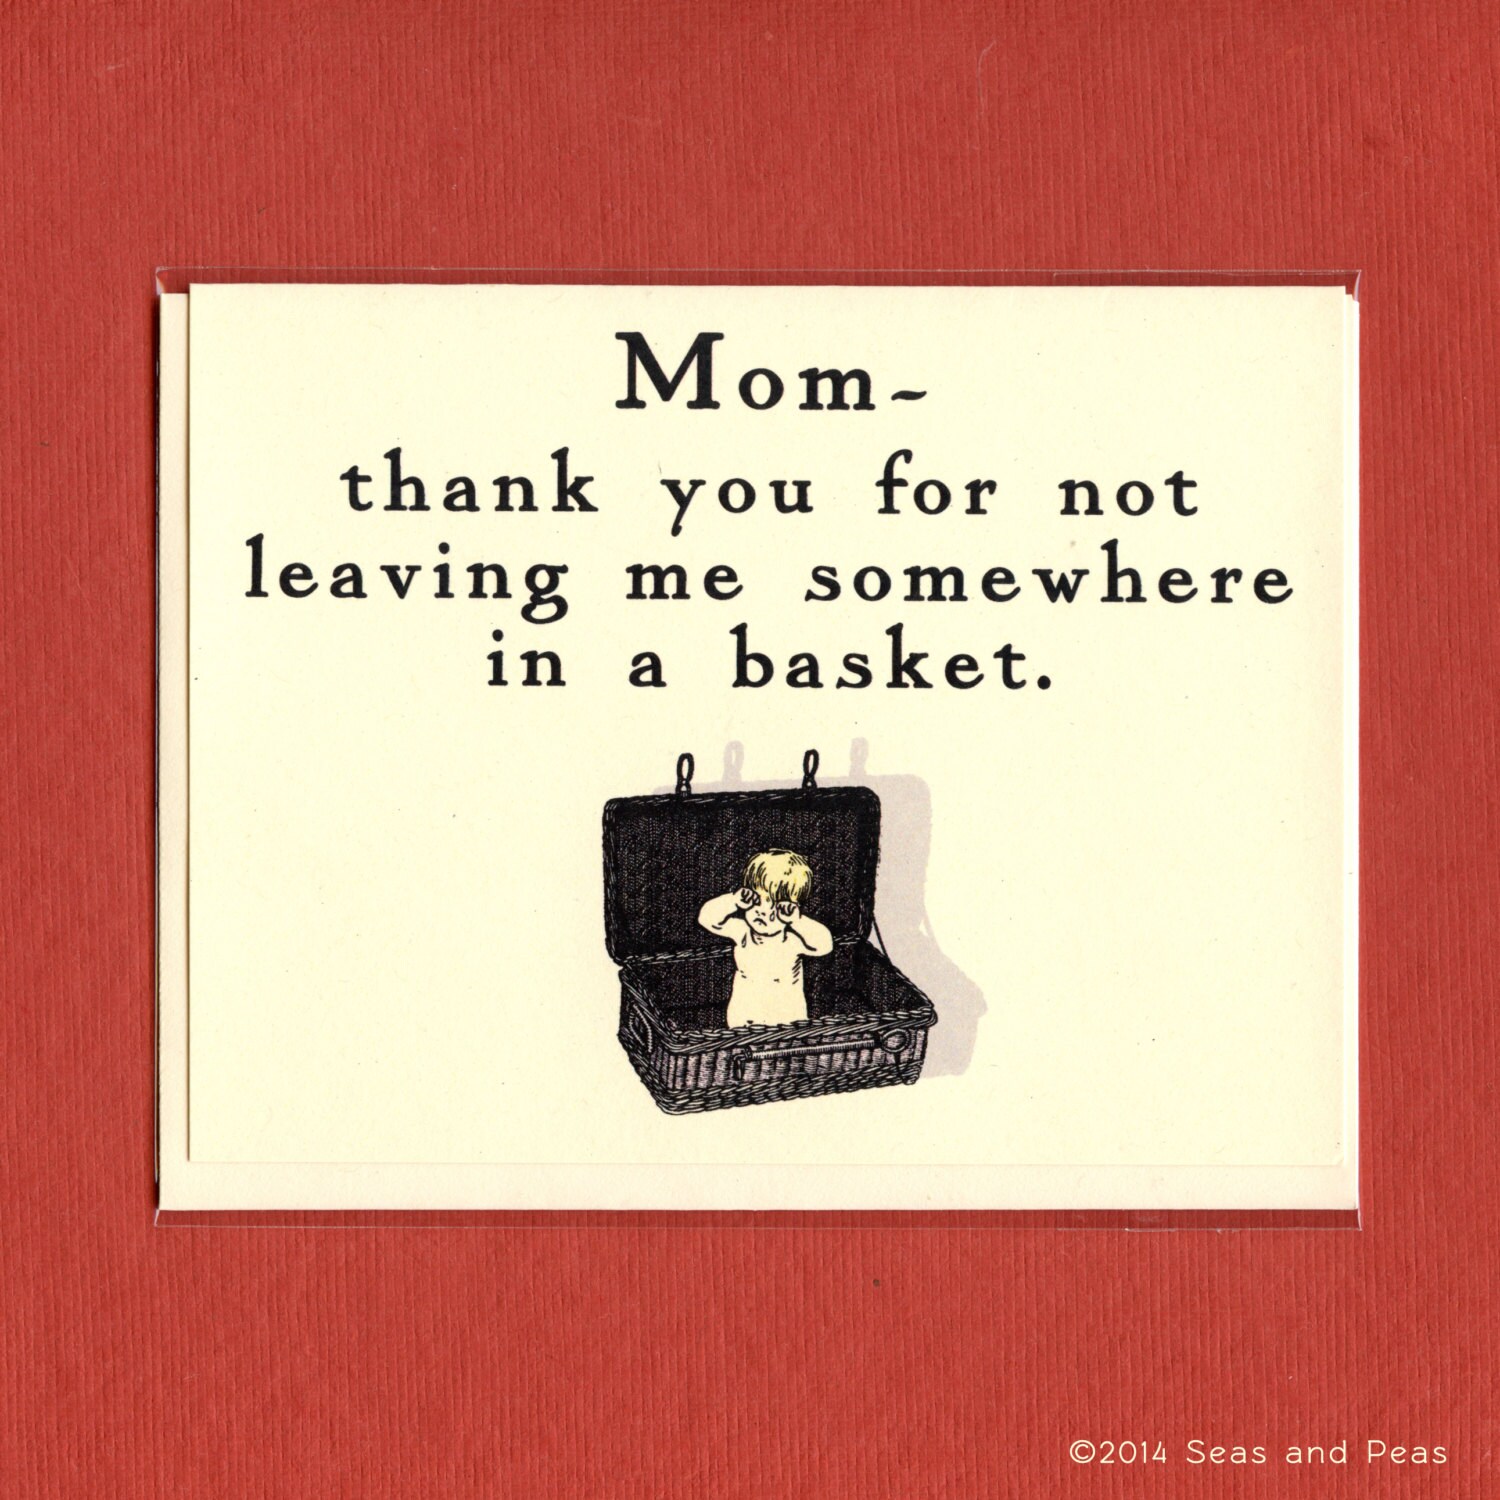 IN A BASKET Funny Card for Mom Funny Thank You Funny